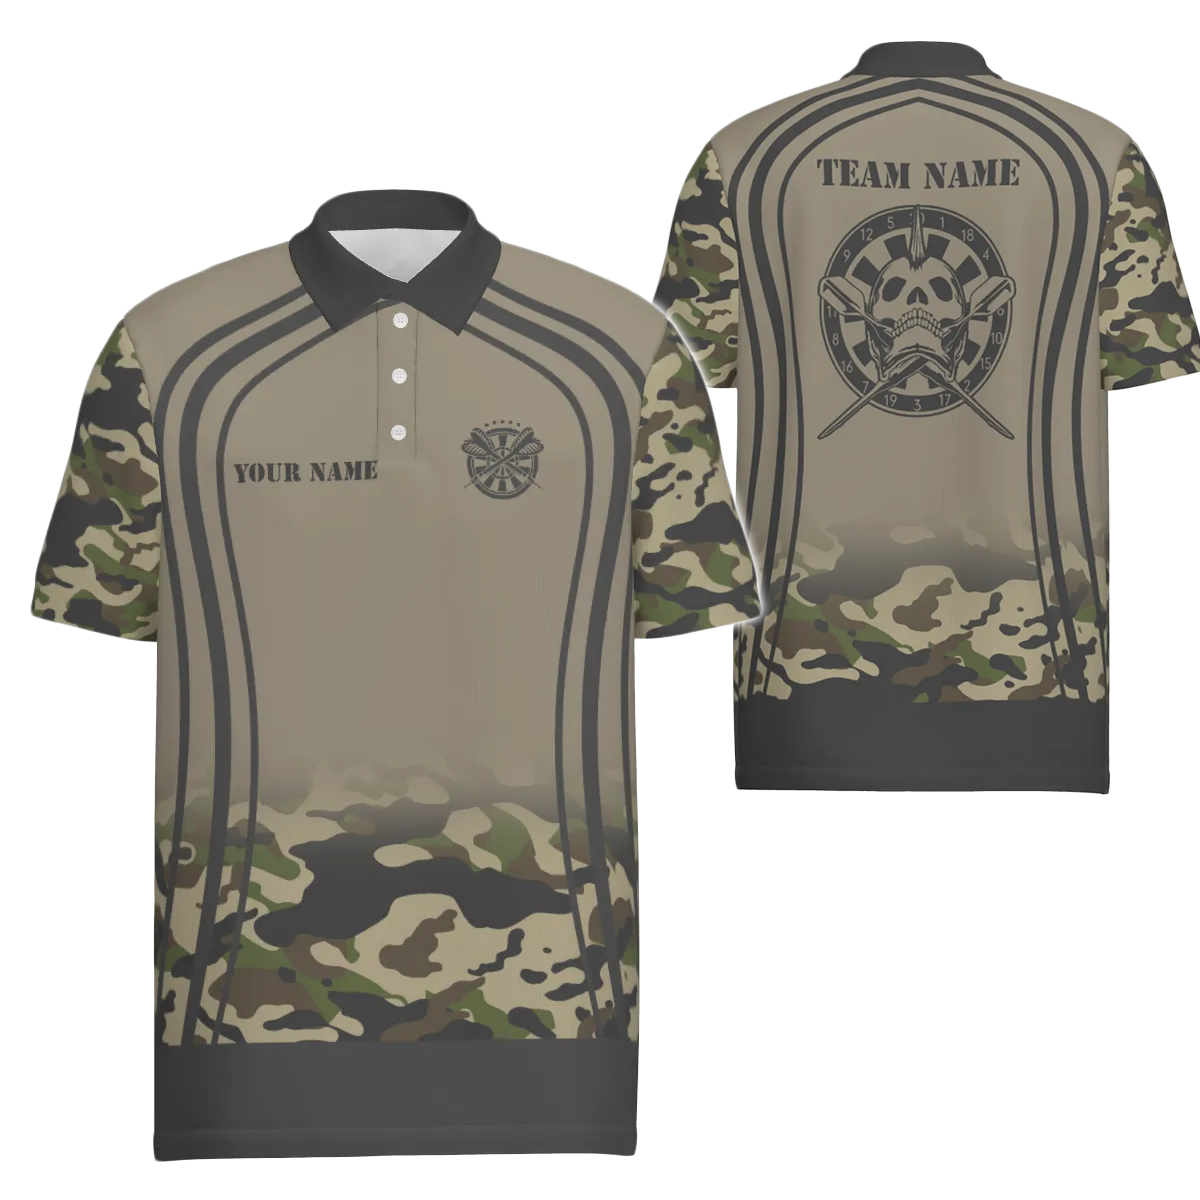 Men's Polo Shirt with Skull and Reaper Design, Personalized Camouflage Darts Shirt for Men U238